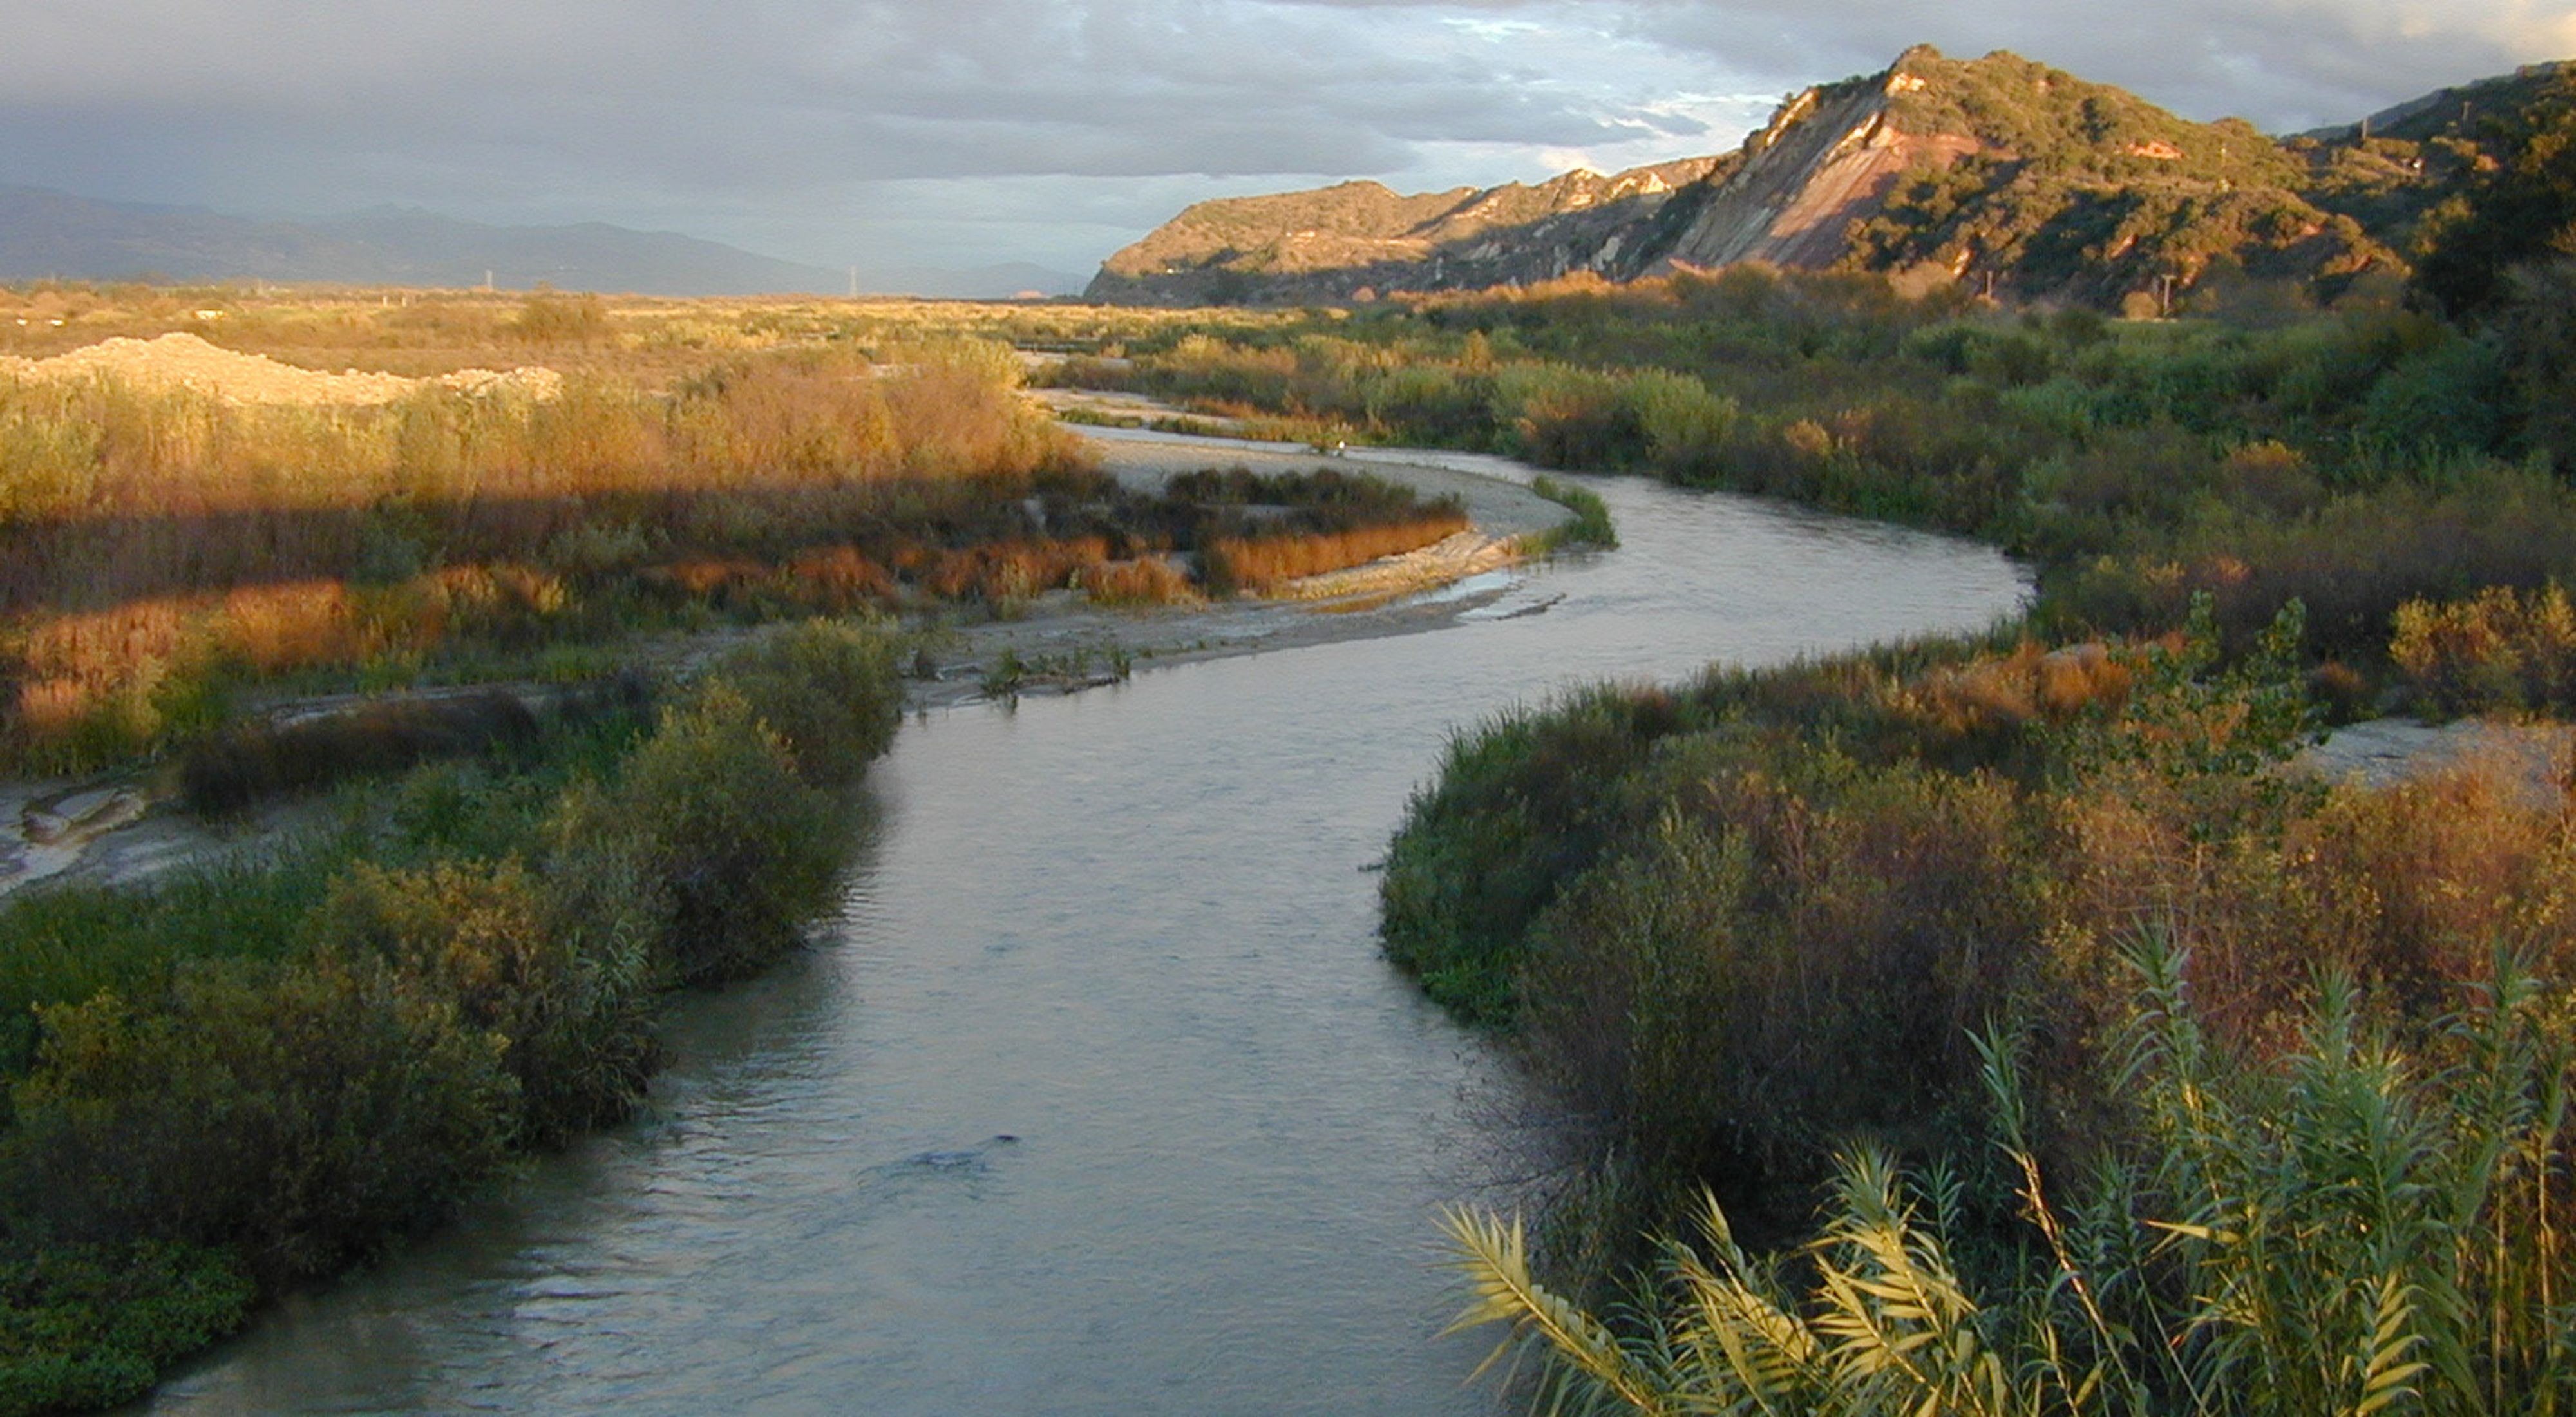 The Santa Clara River winds through a scrubby, tree-filled landscape with a mountain in the background.